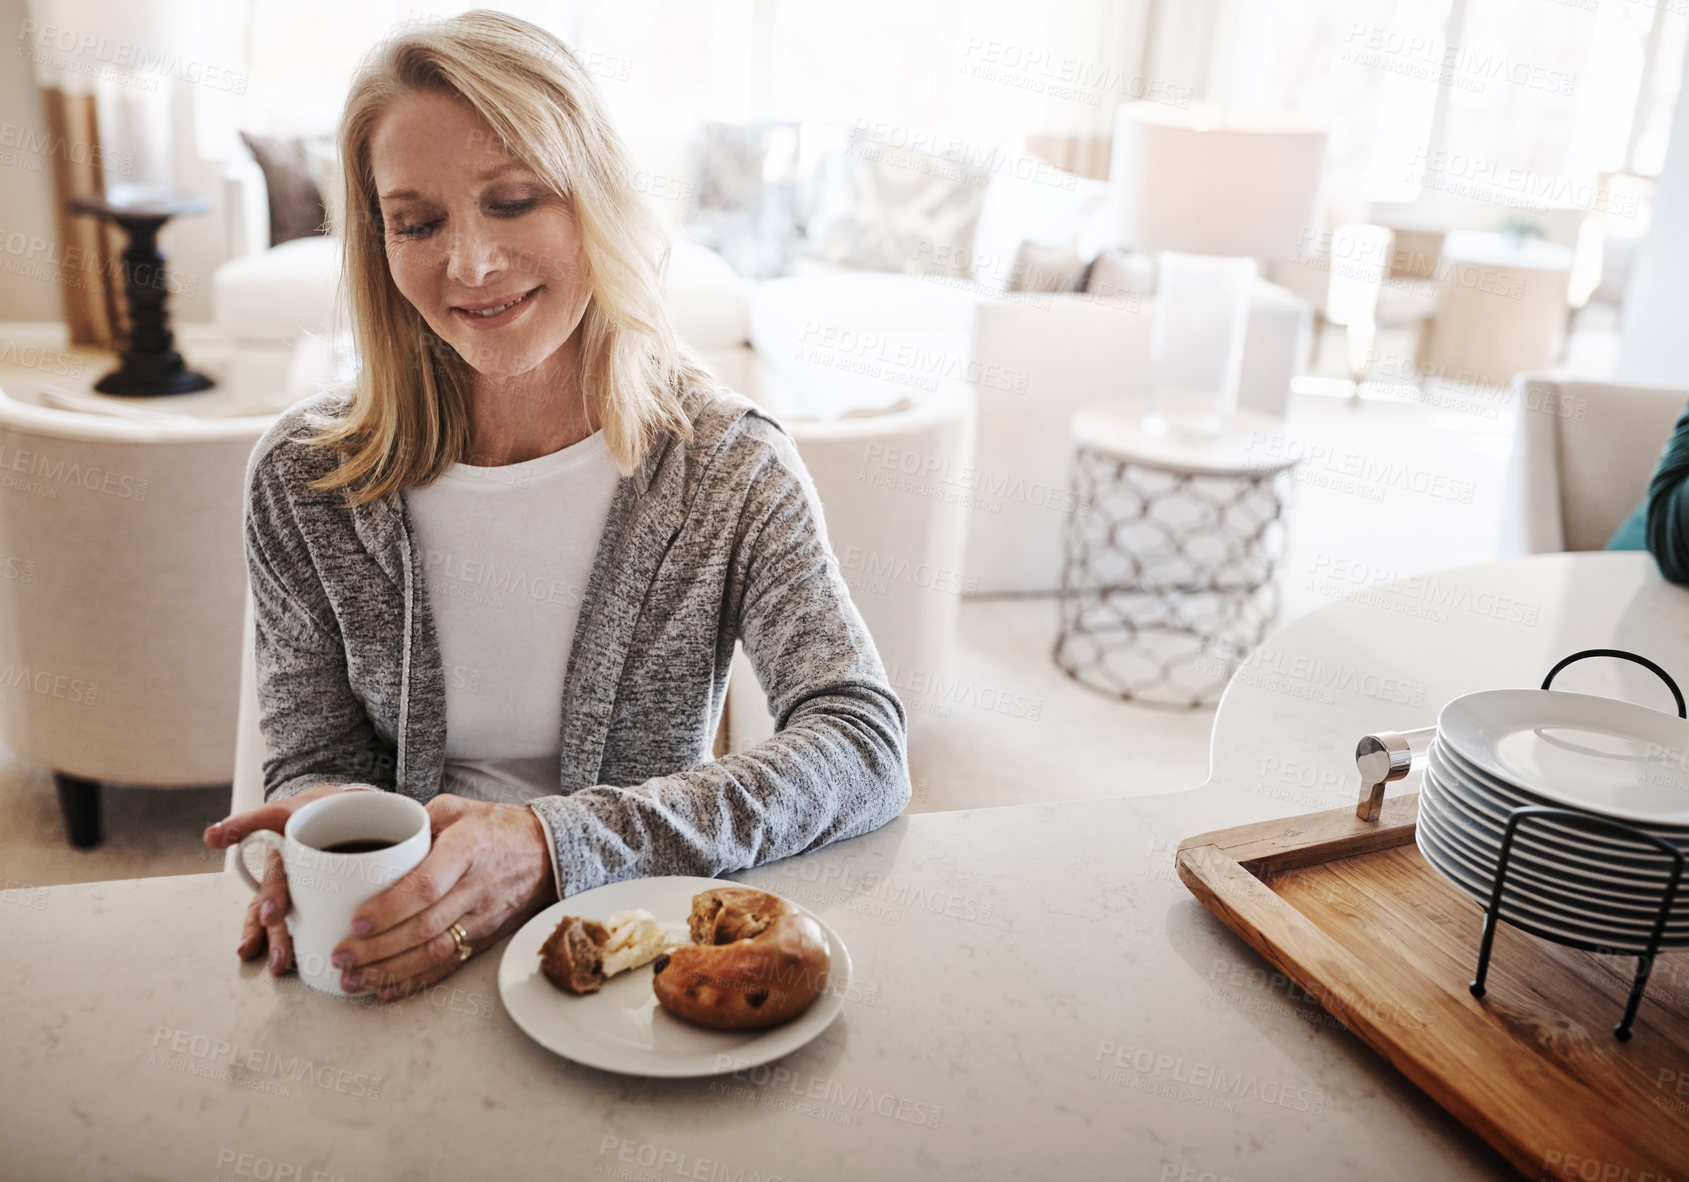 Buy stock photo Shot of a mature woman having coffee and a snack during a relaxed day at home